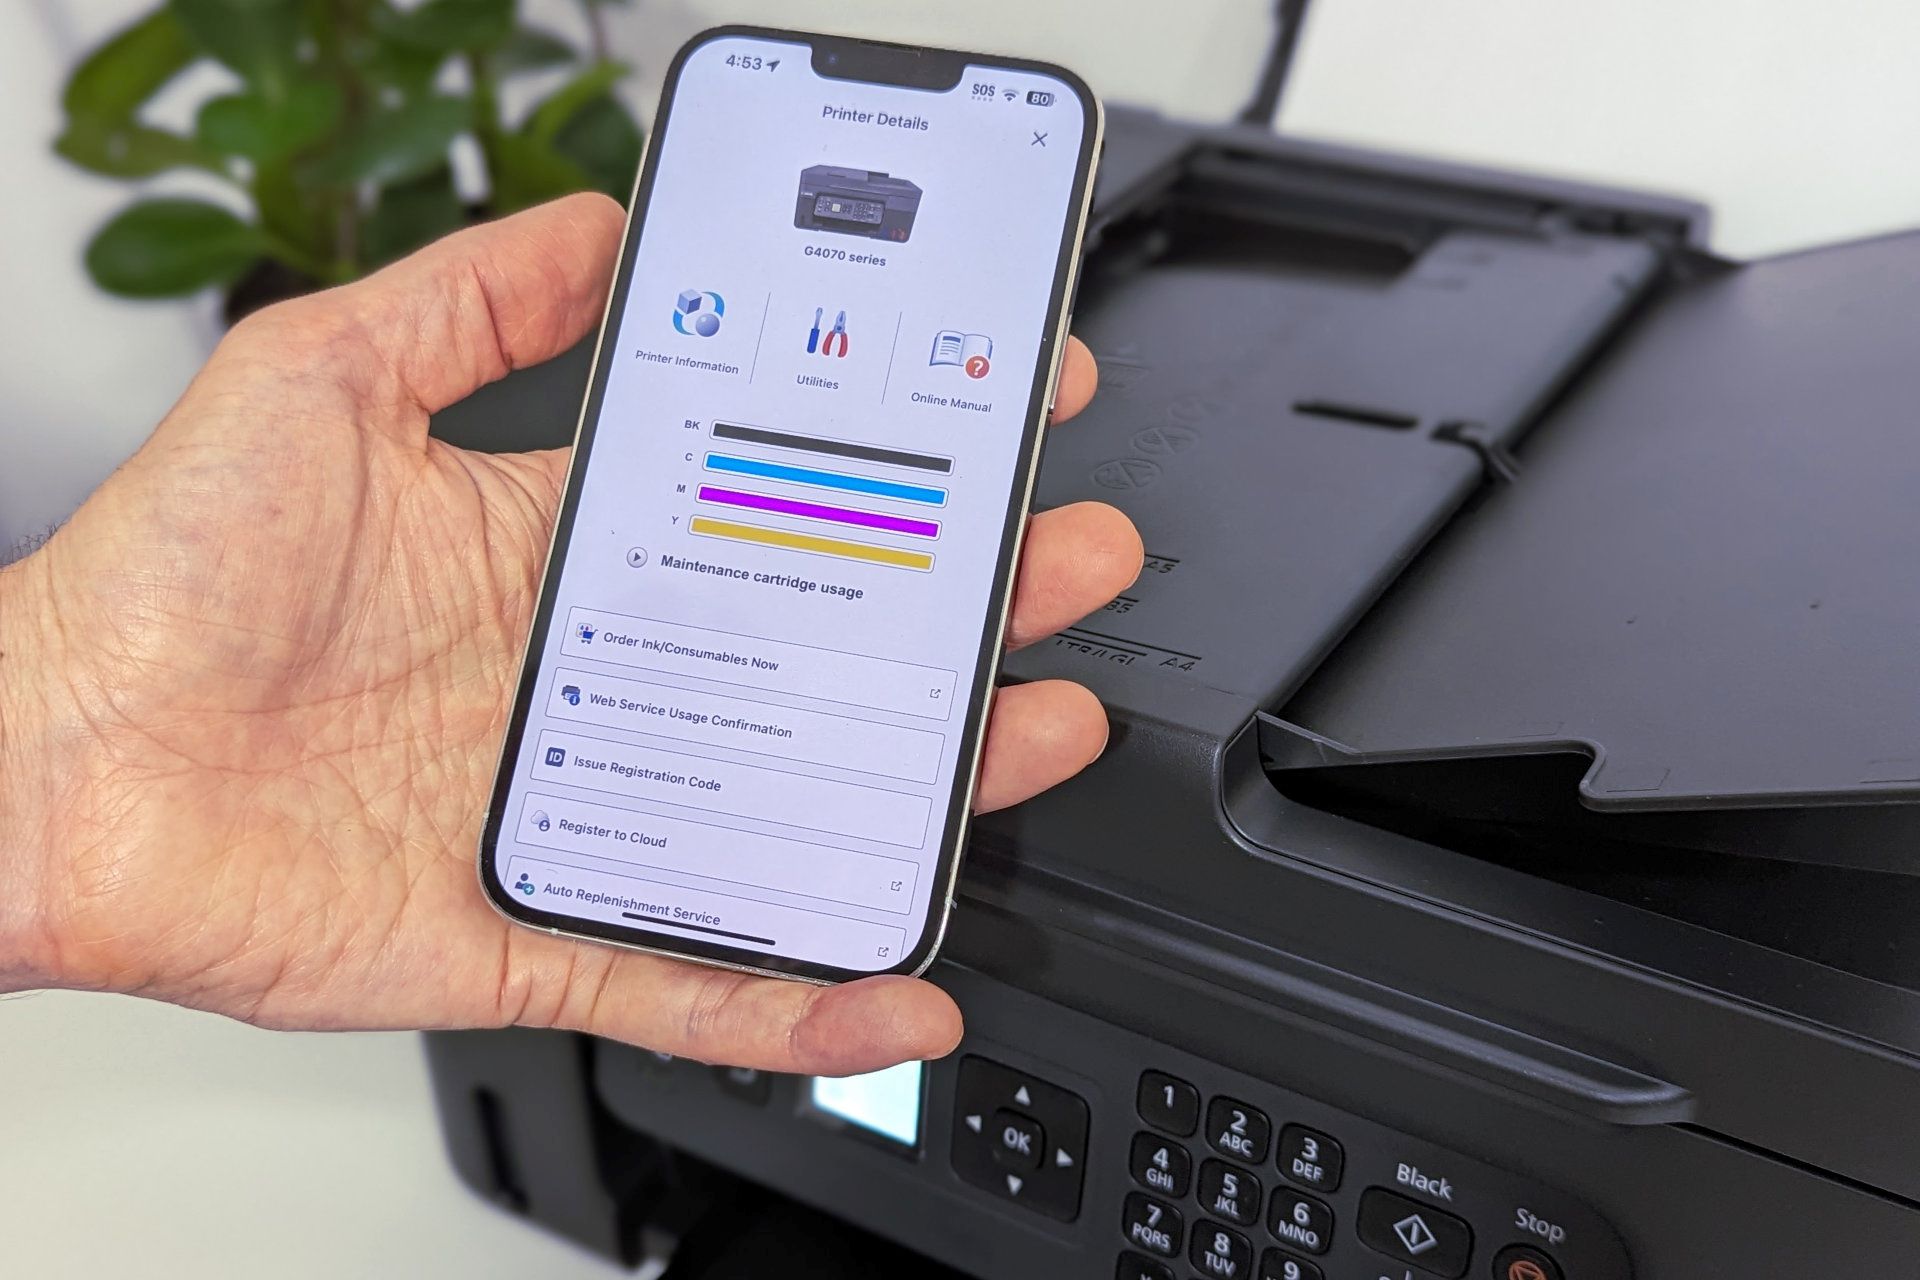 How To Check The Ink Level In HP Printer